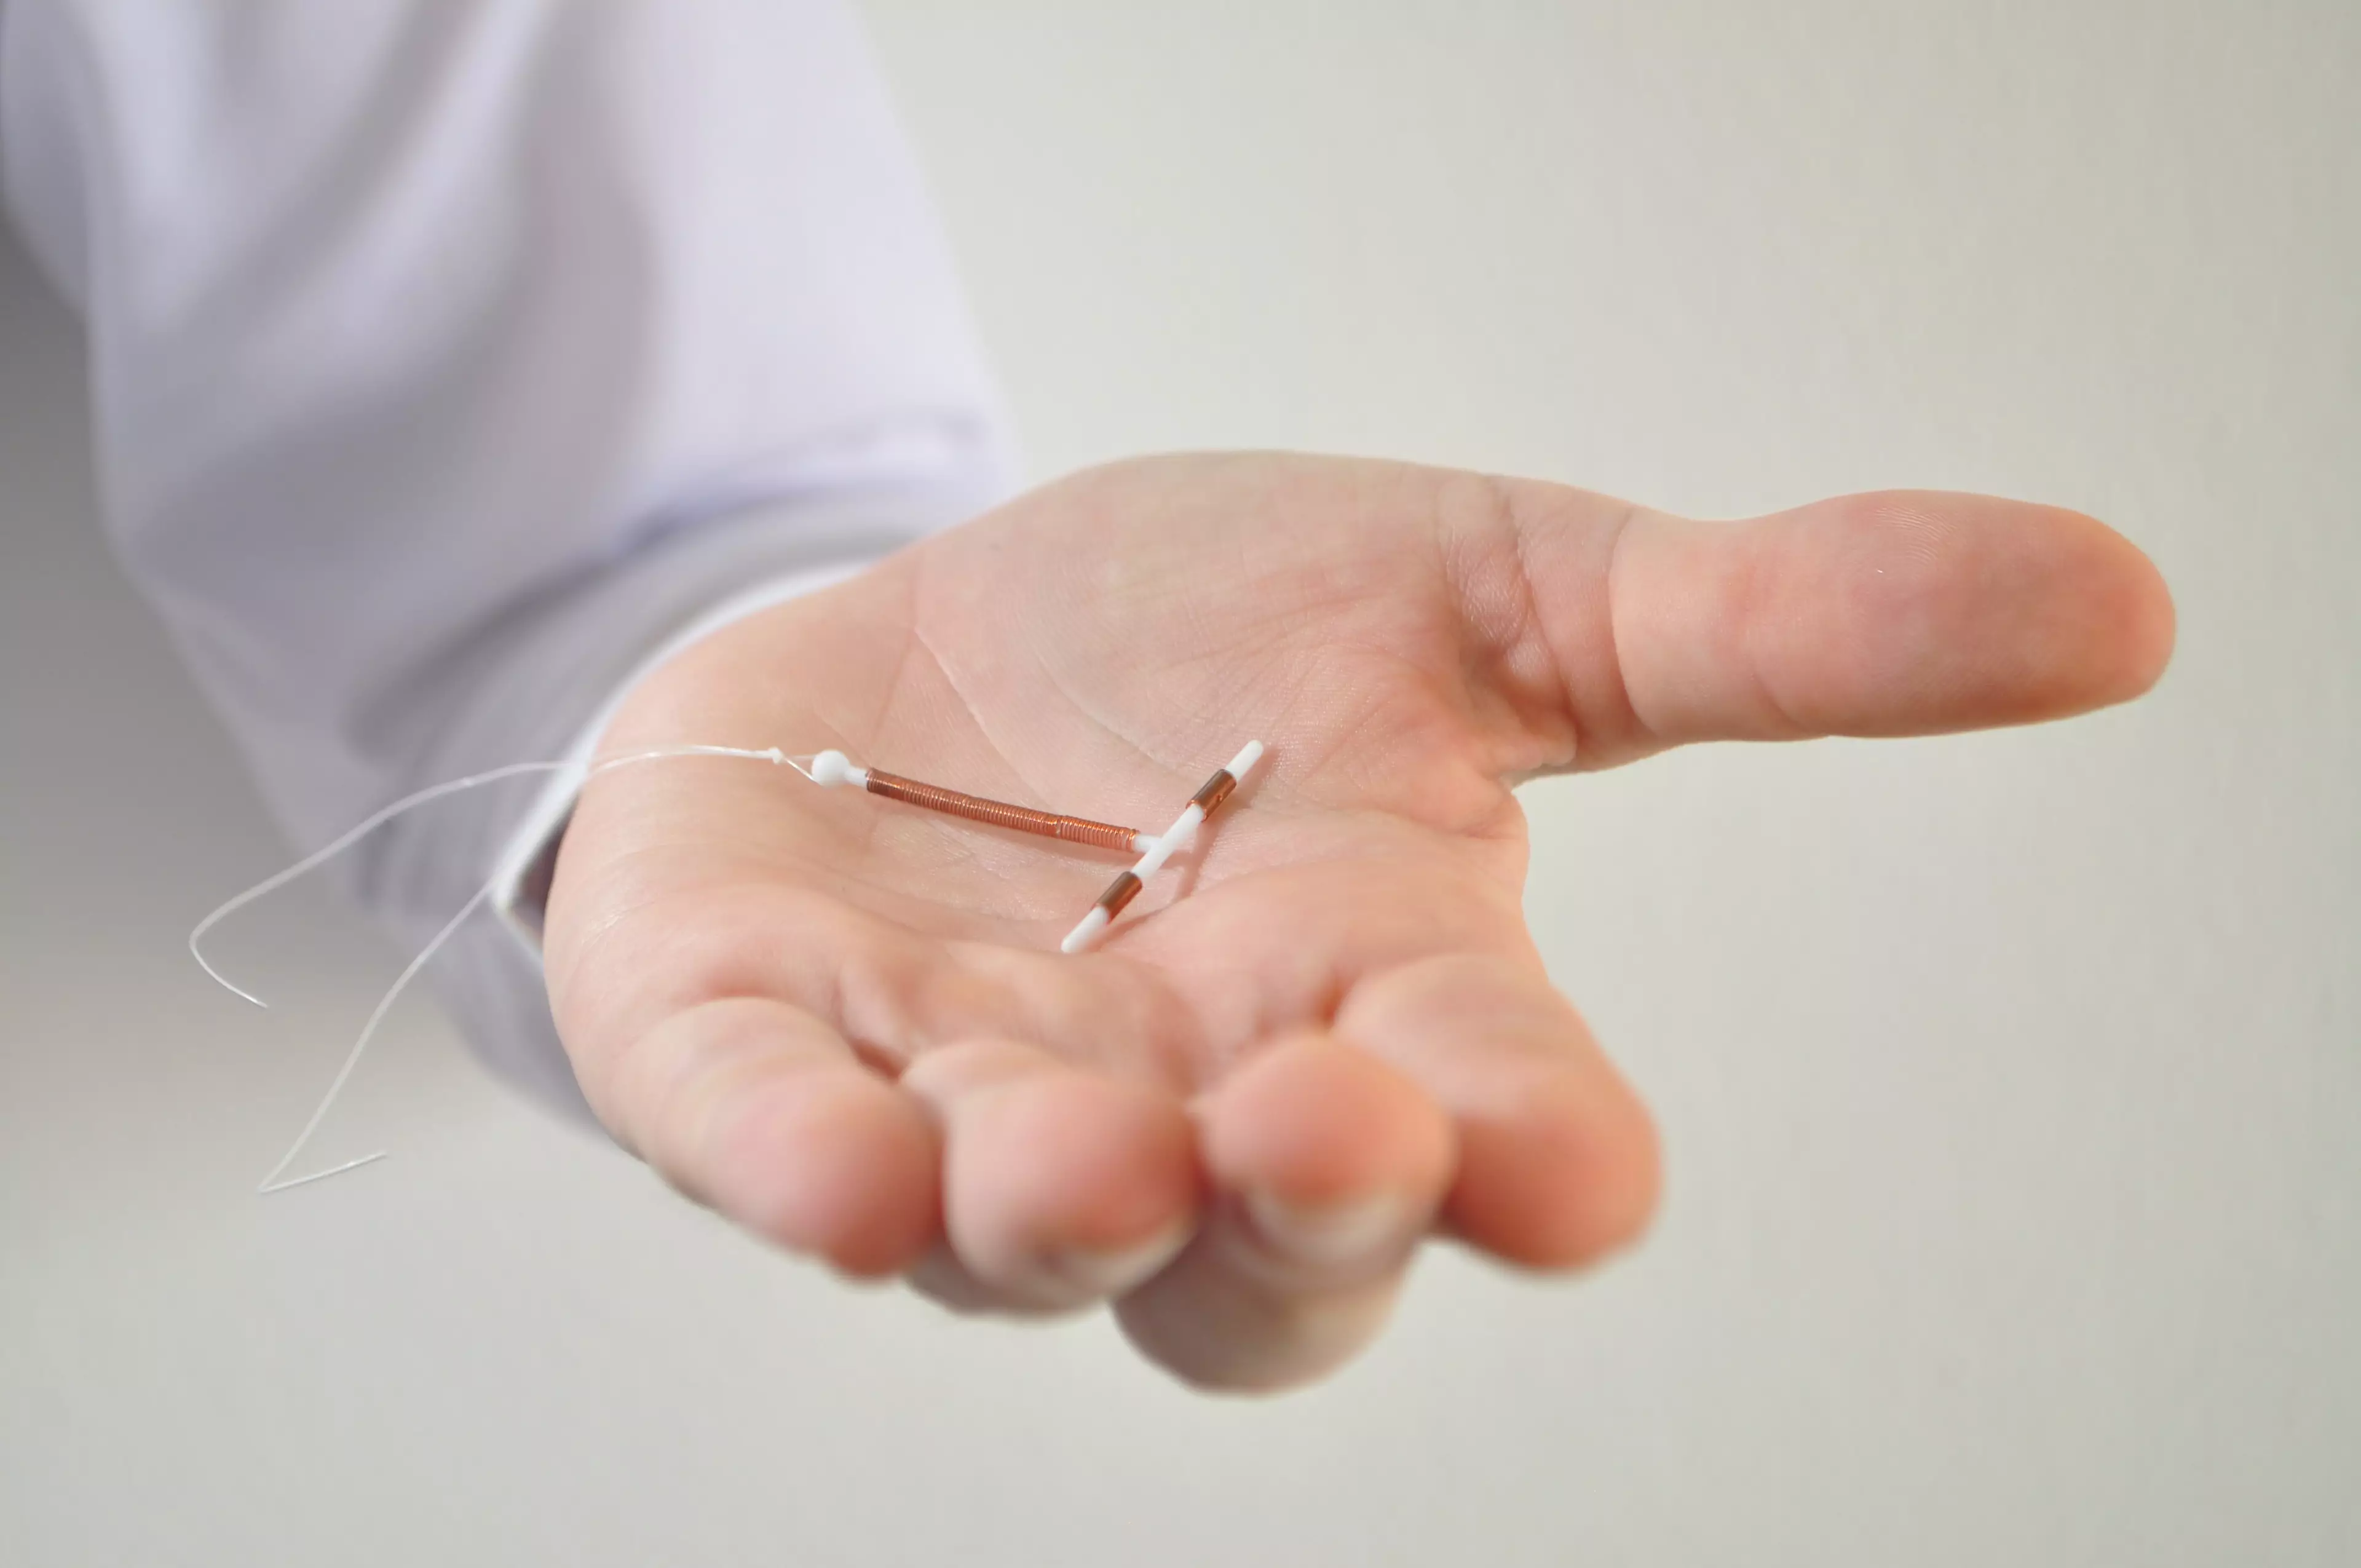 An IUD is a small T-shaped device made from plastic and copper that is inserted into the uterus (